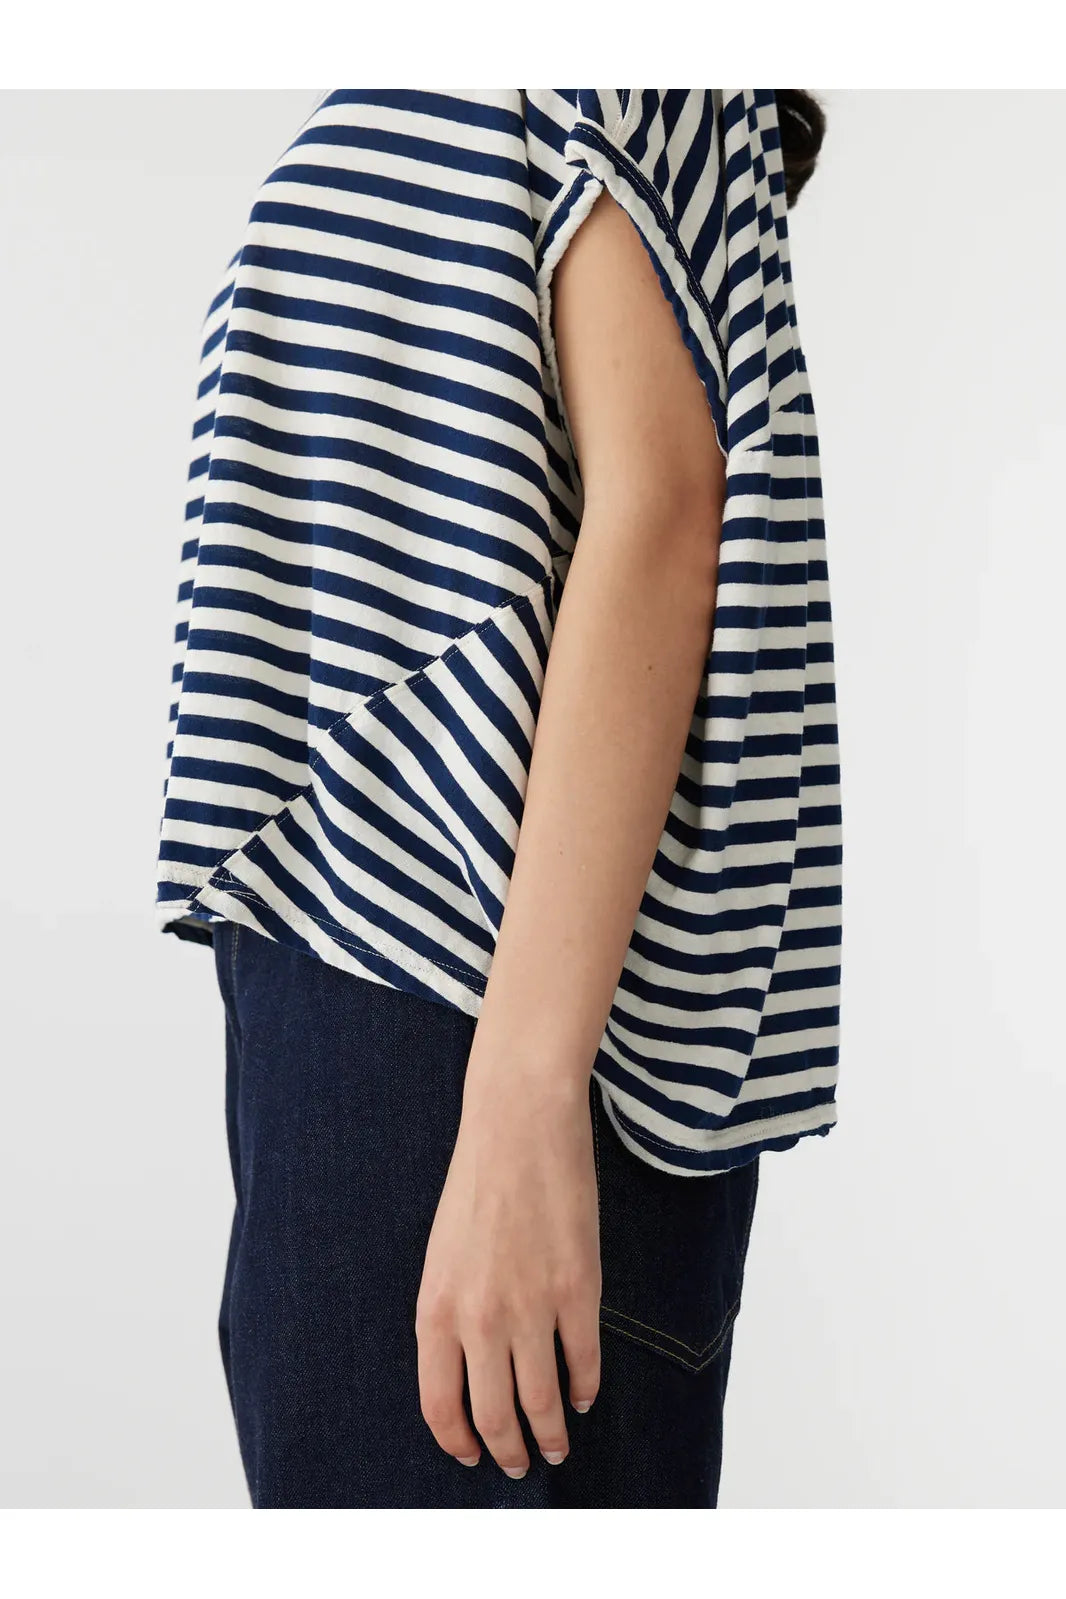 Stripe Slouch Circle Tank in Navy/ Undyed by Bassike